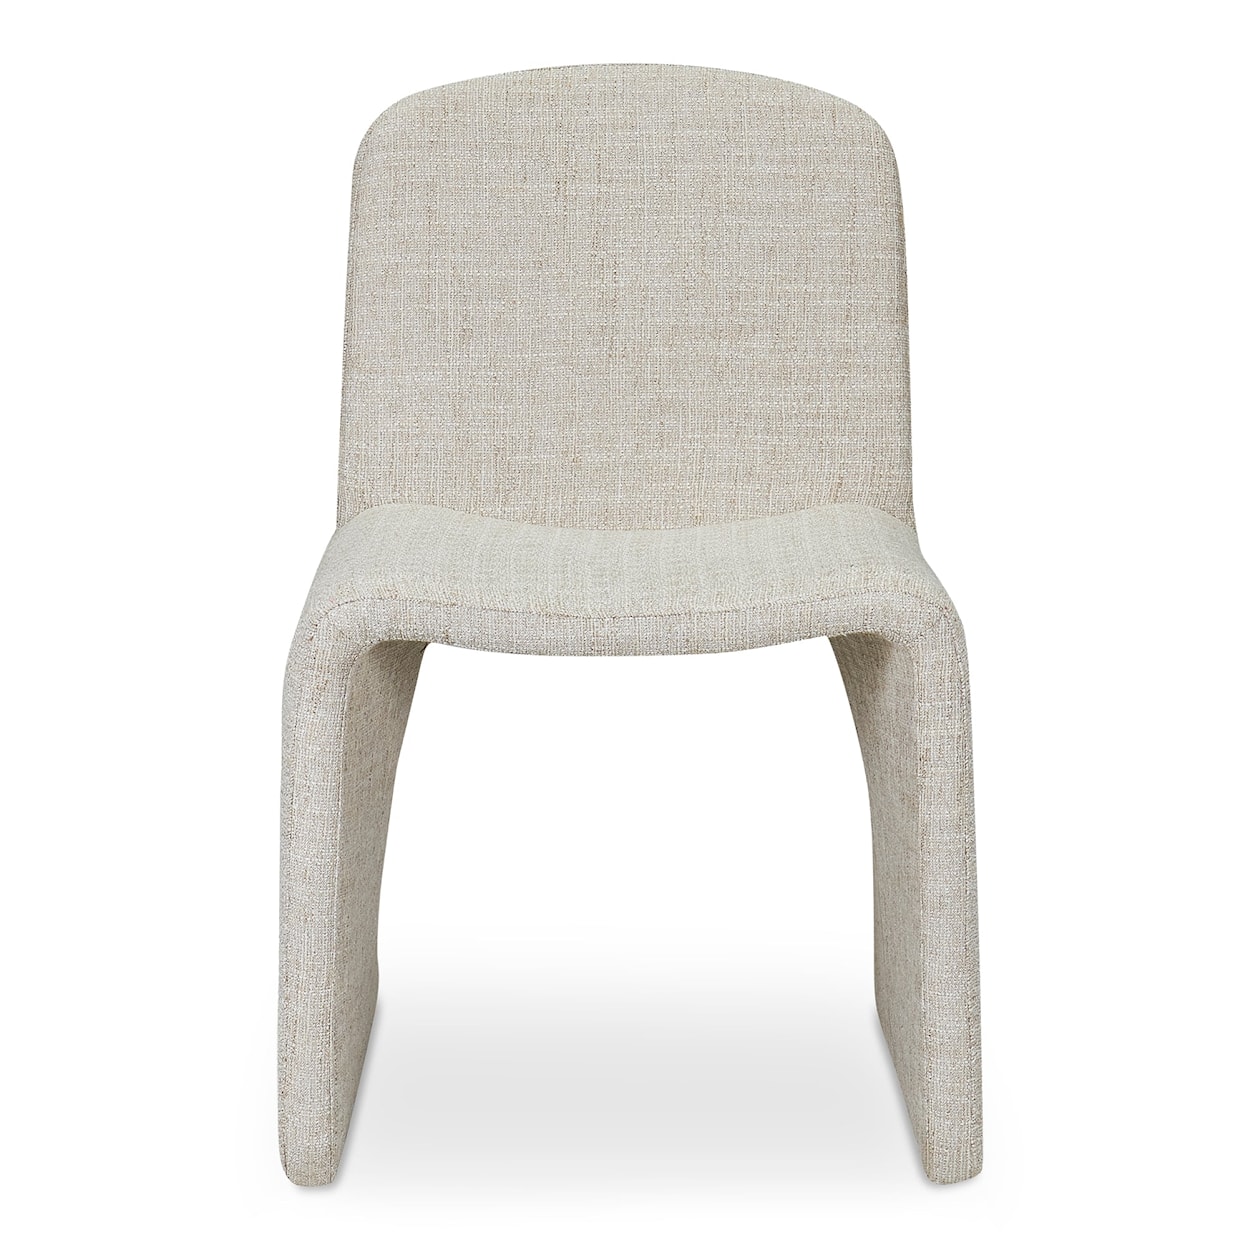 Moe's Home Collection Ella Dining Chair